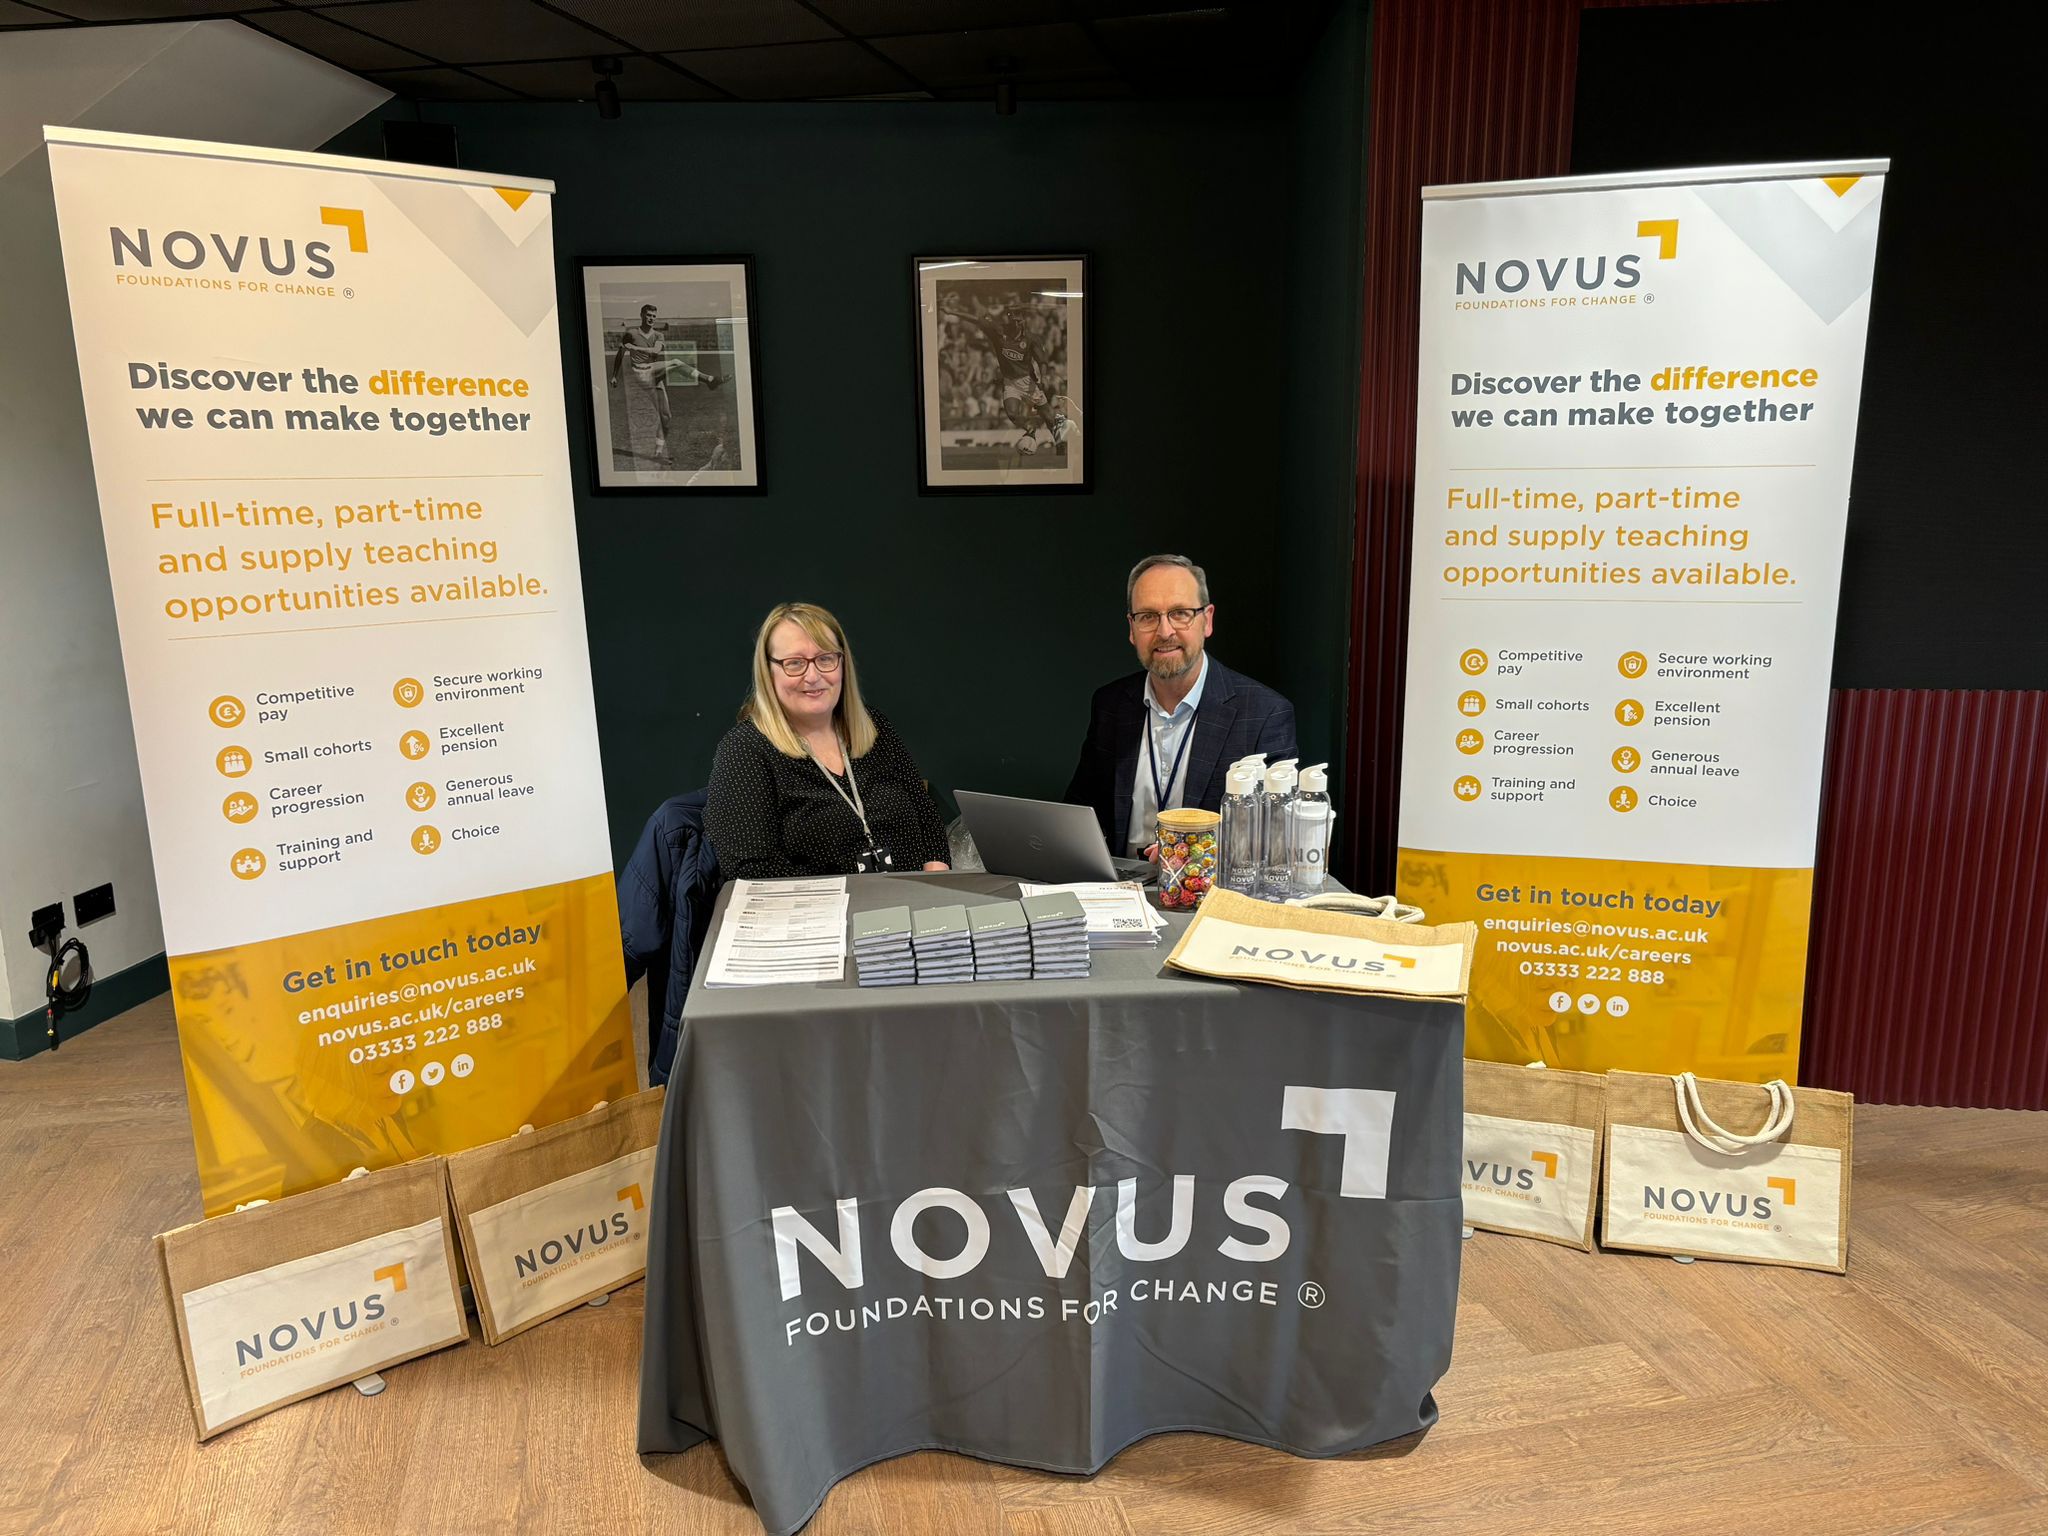 Novus at our event in Middlesbrough